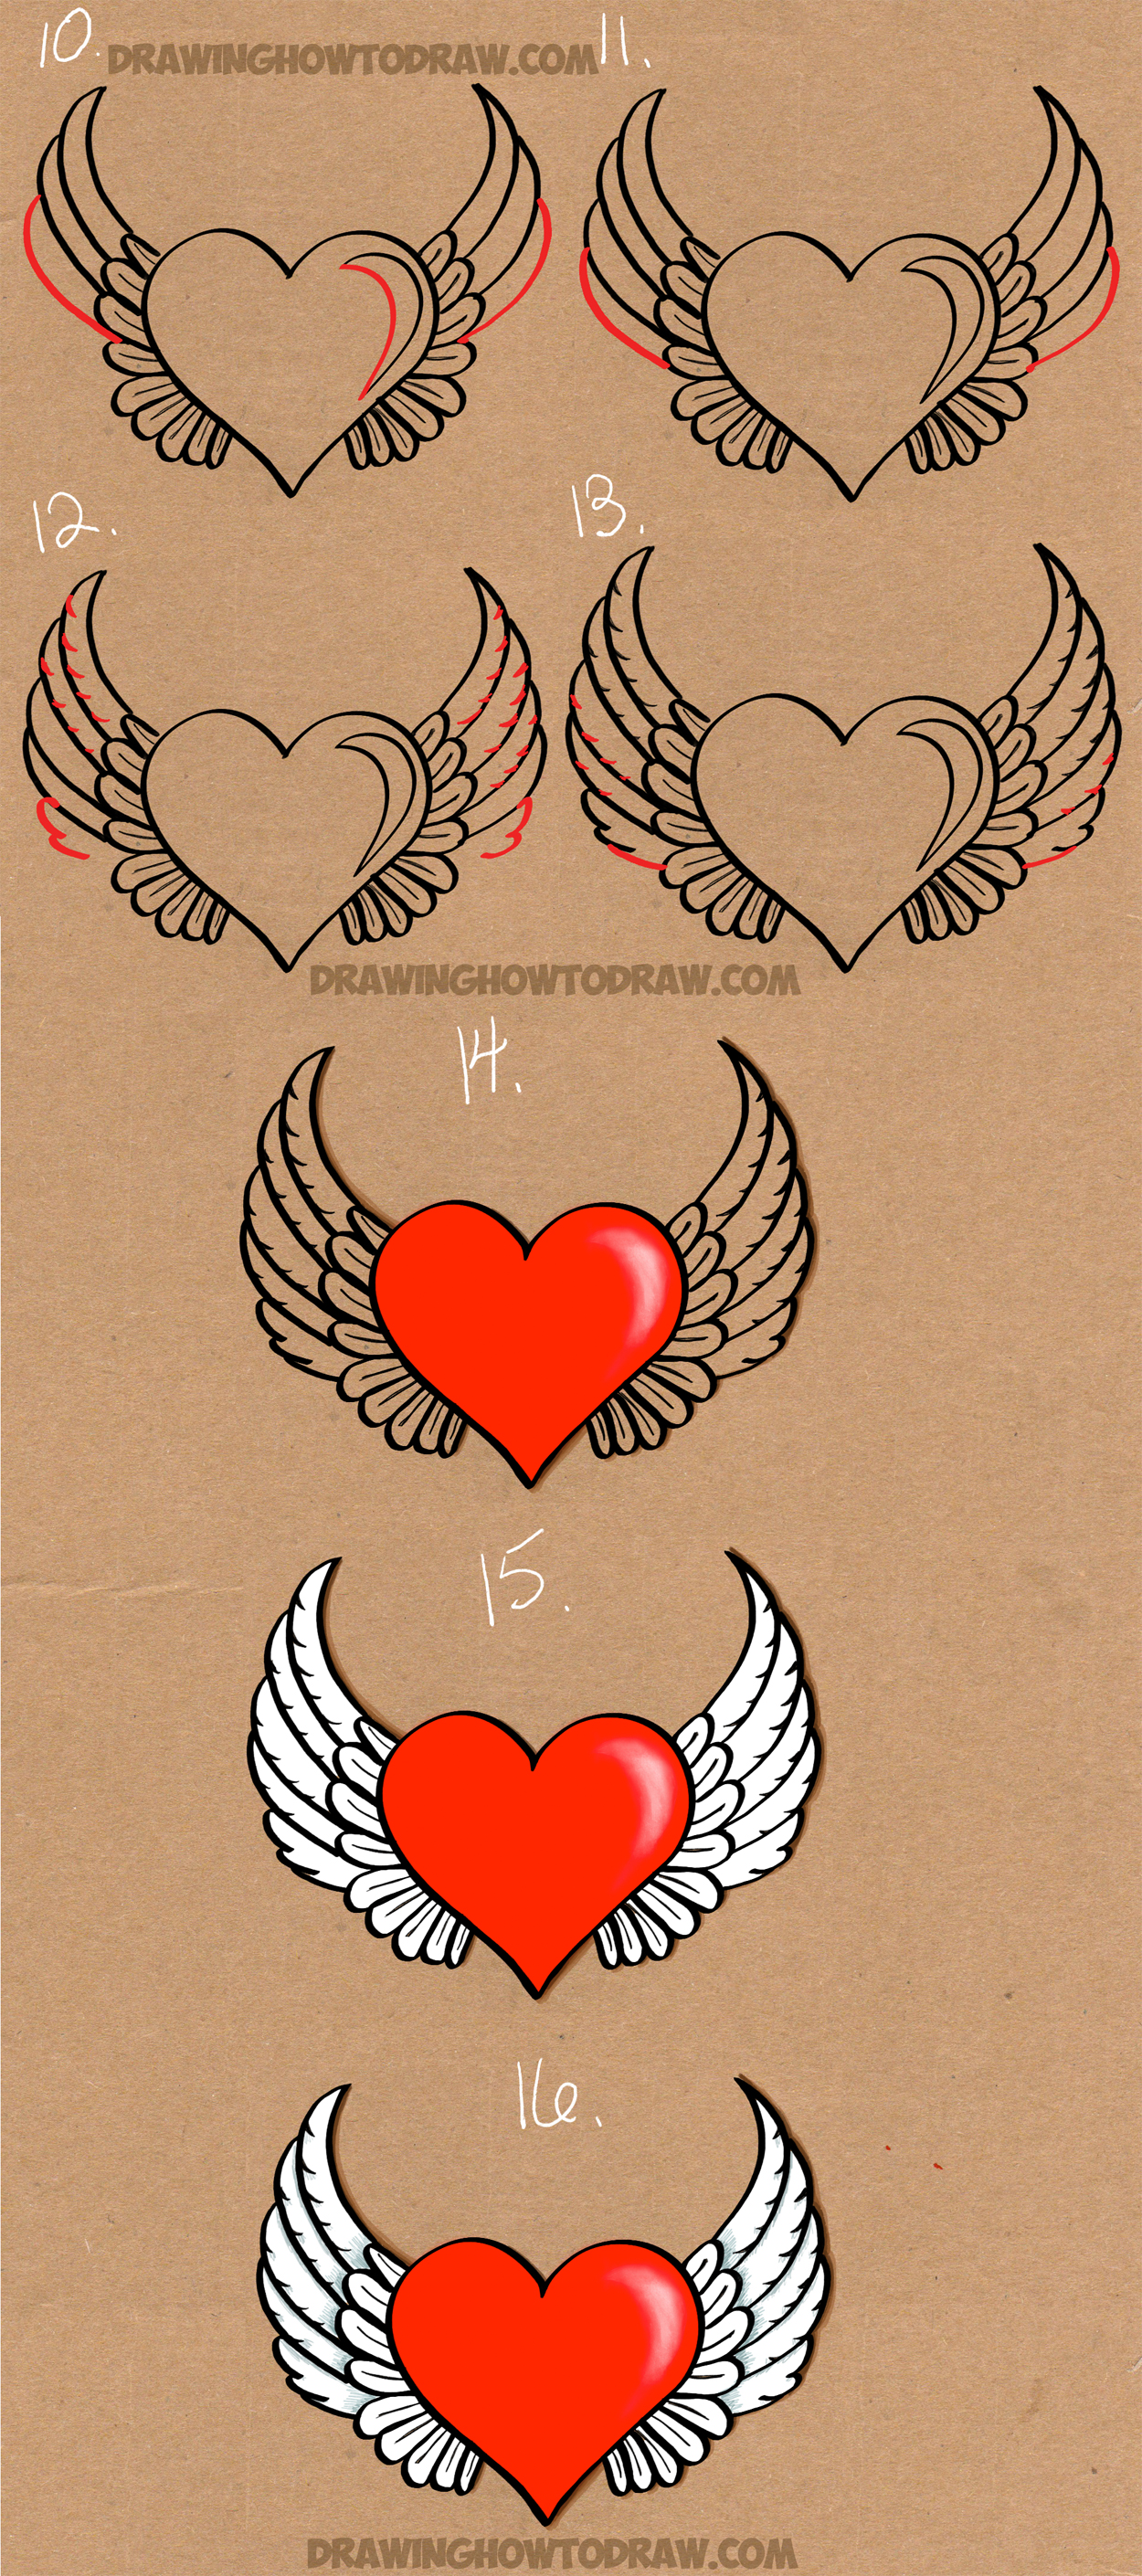 how to draw a heart with flames and wings